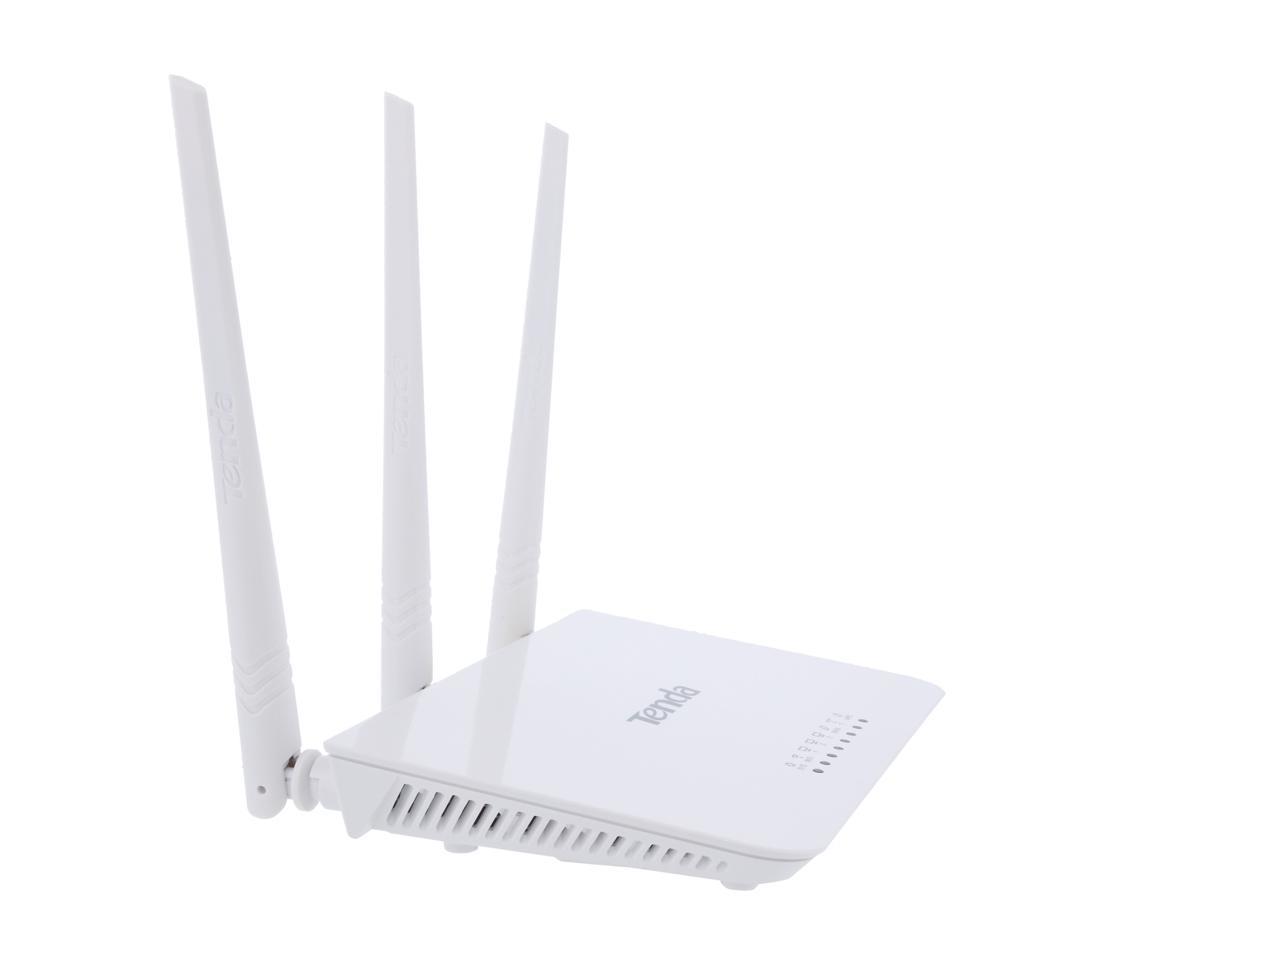 Assortment jet Forge TENDA F3 Wireless N300 Home Router, 300 Mbps, IP QoS, WPS Button -  Newegg.com